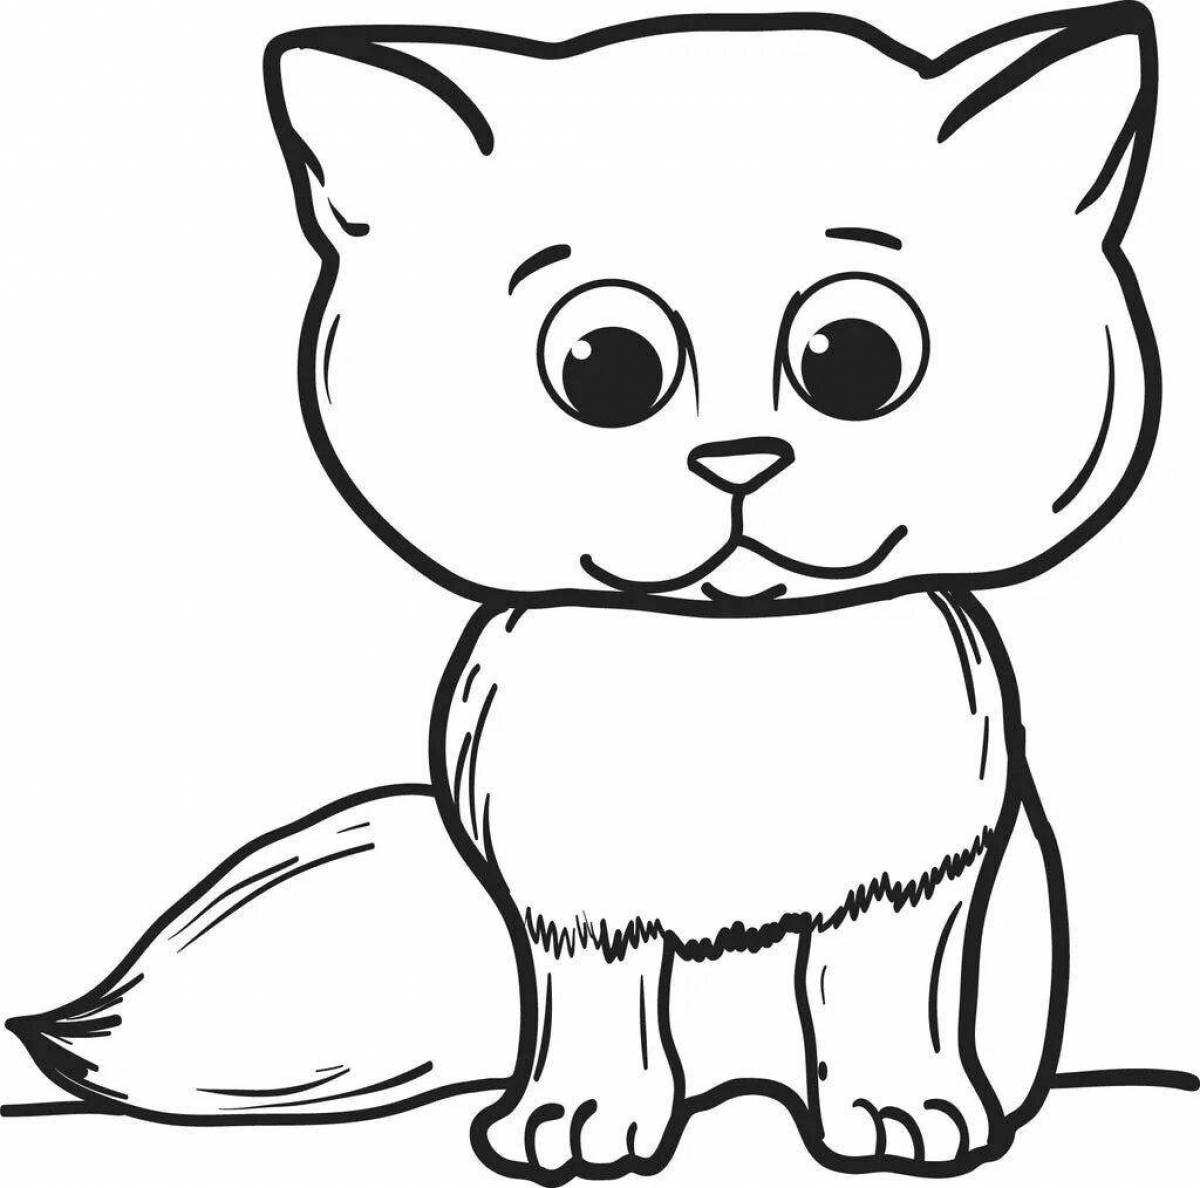 Amazing cat coloring page